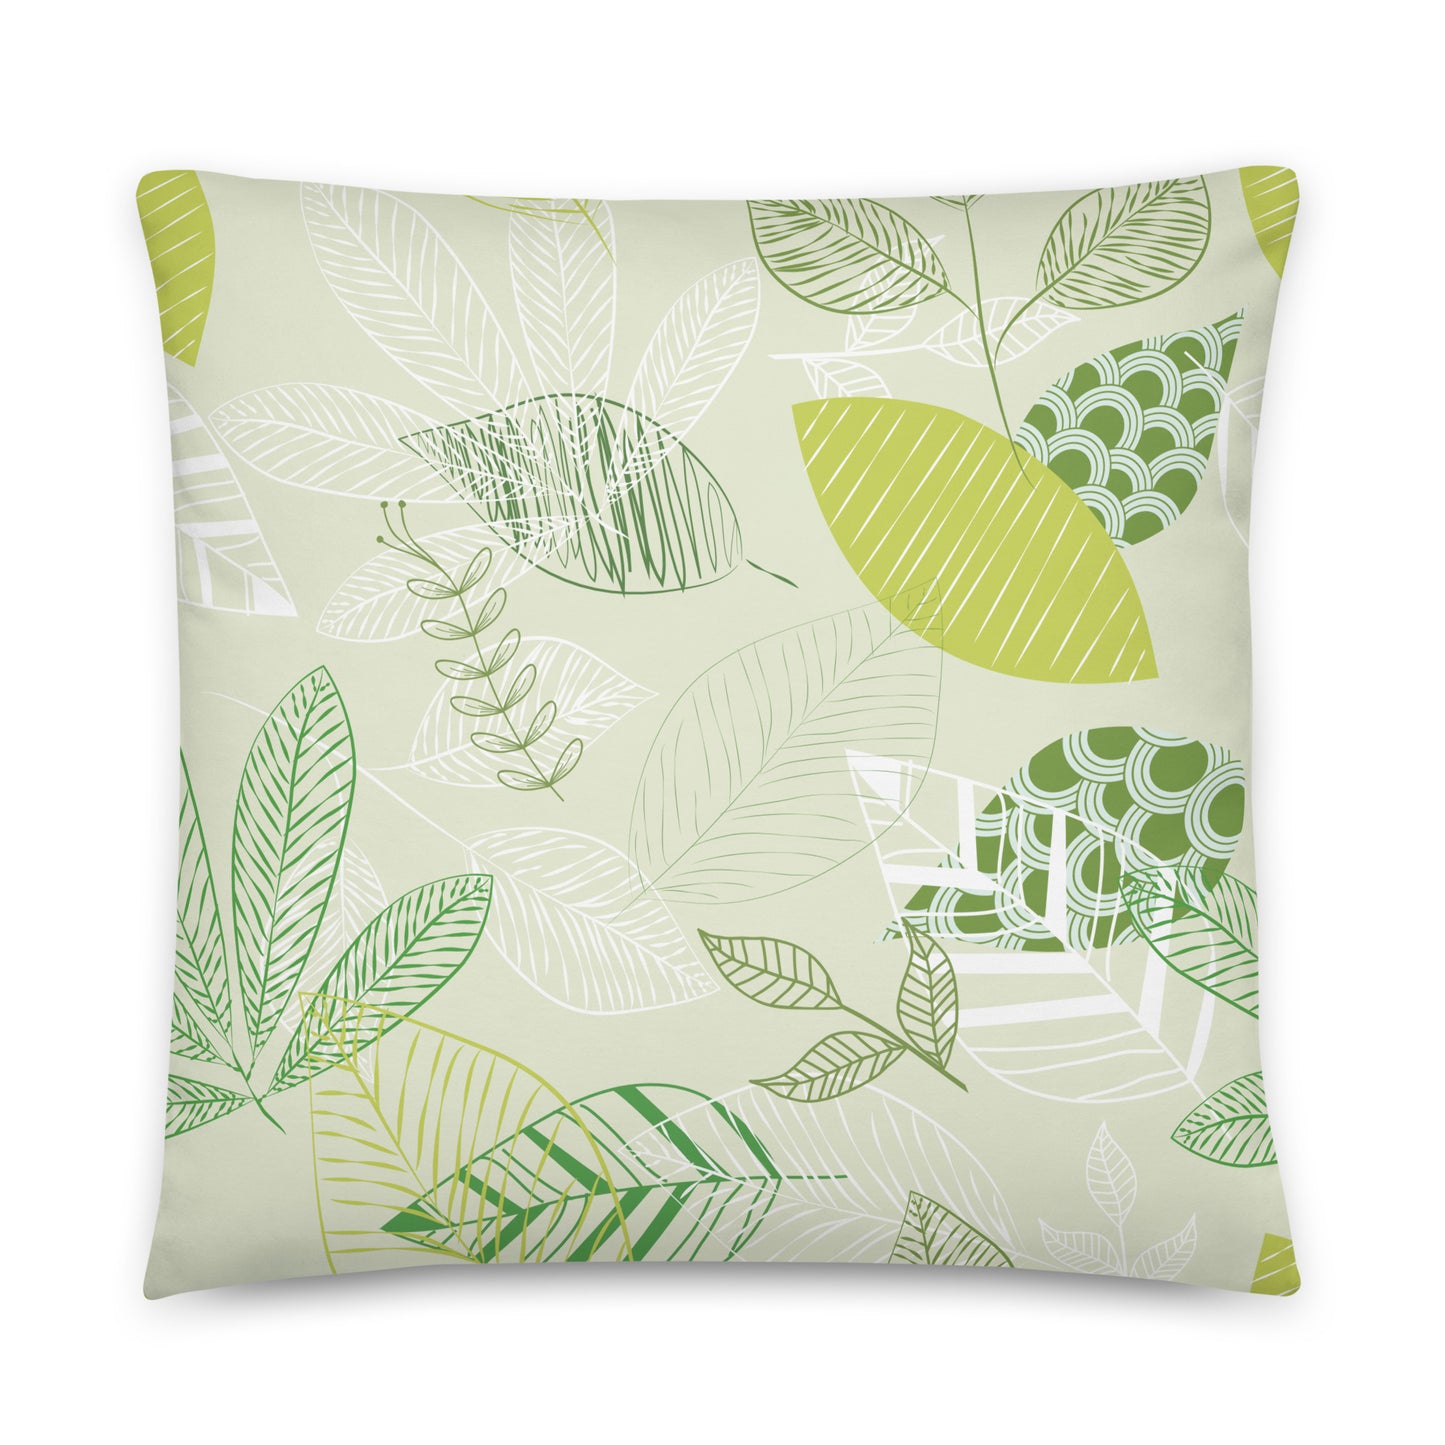 Spring Time - Sustainably Made Pillows